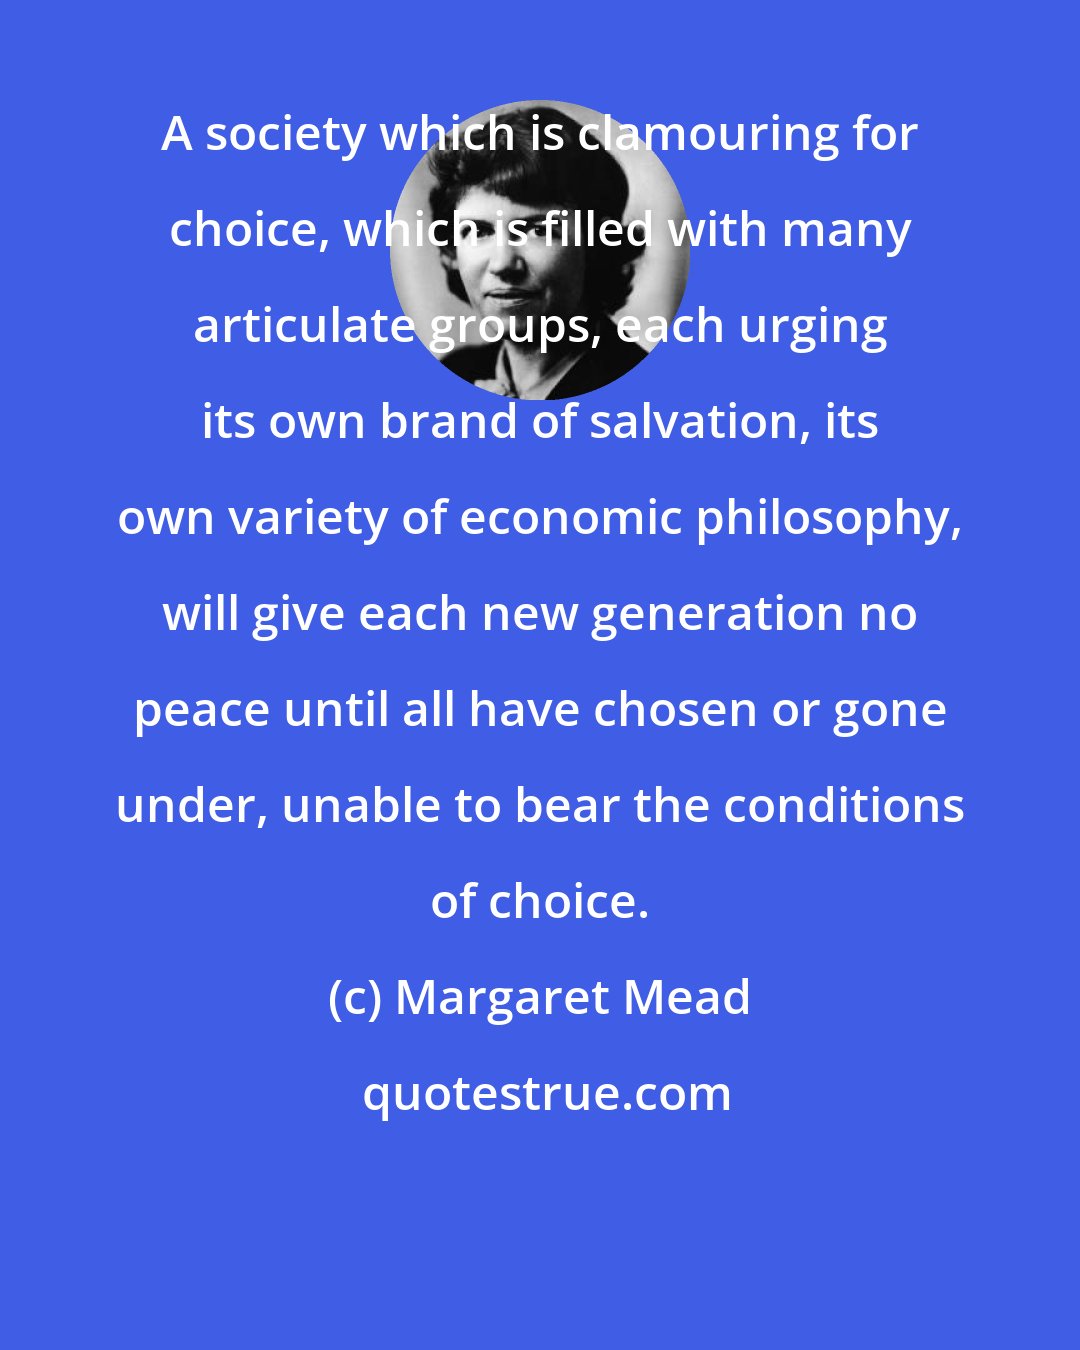 Margaret Mead: A society which is clamouring for choice, which is filled with many articulate groups, each urging its own brand of salvation, its own variety of economic philosophy, will give each new generation no peace until all have chosen or gone under, unable to bear the conditions of choice.